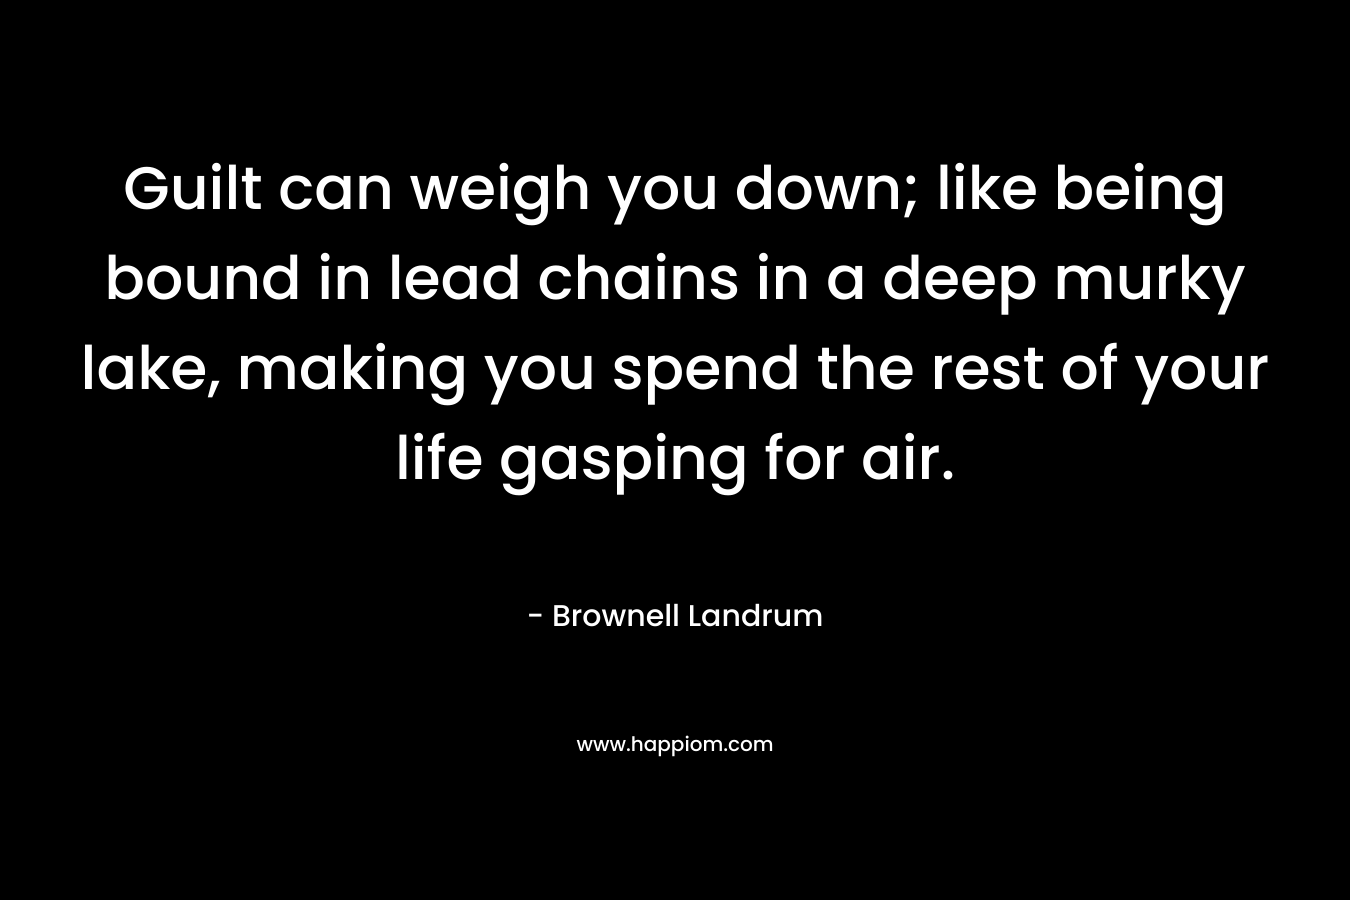 Guilt can weigh you down; like being bound in lead chains in a deep murky lake, making you spend the rest of your life gasping for air. – Brownell Landrum